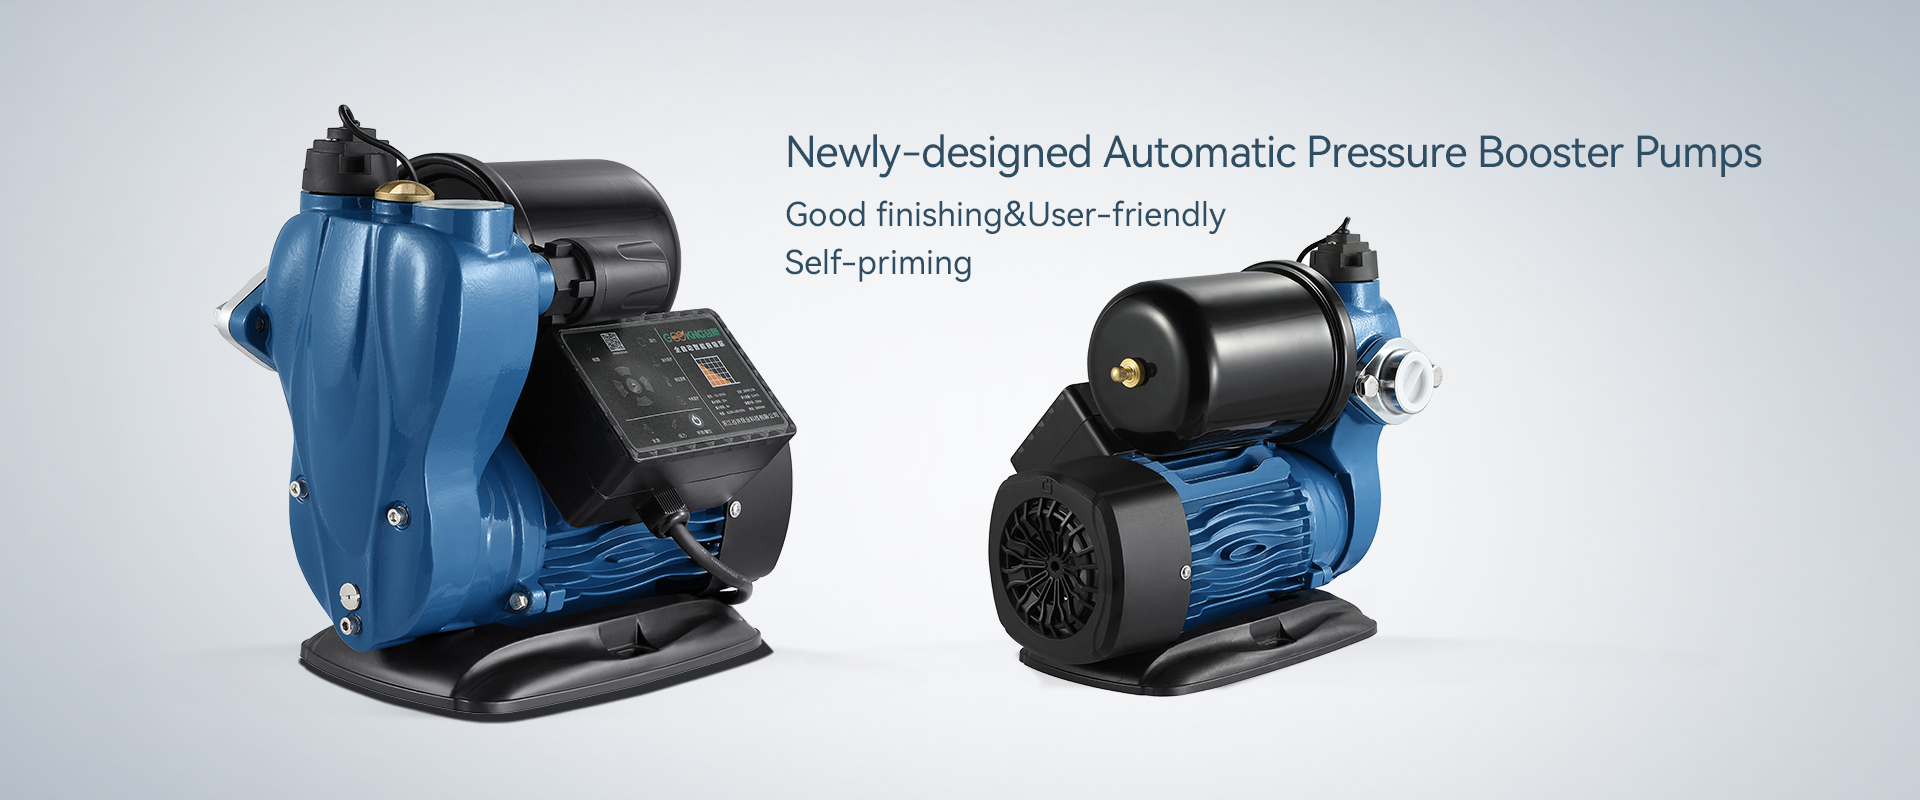 gks new automatic pressure booster pump